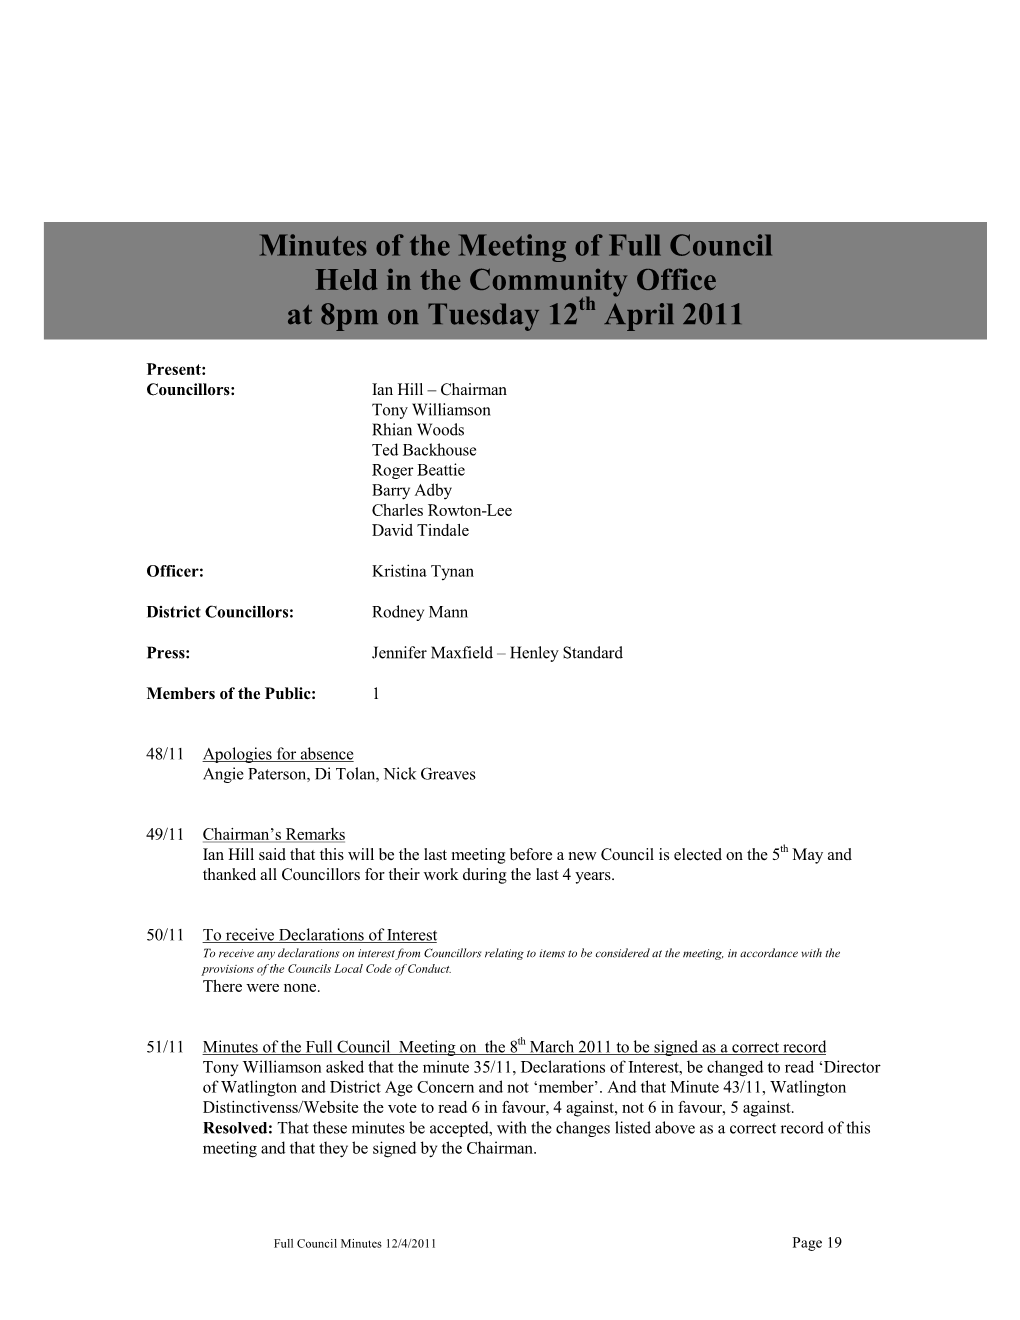 Minutes of the Meeting of Full Council Held in the Community Office